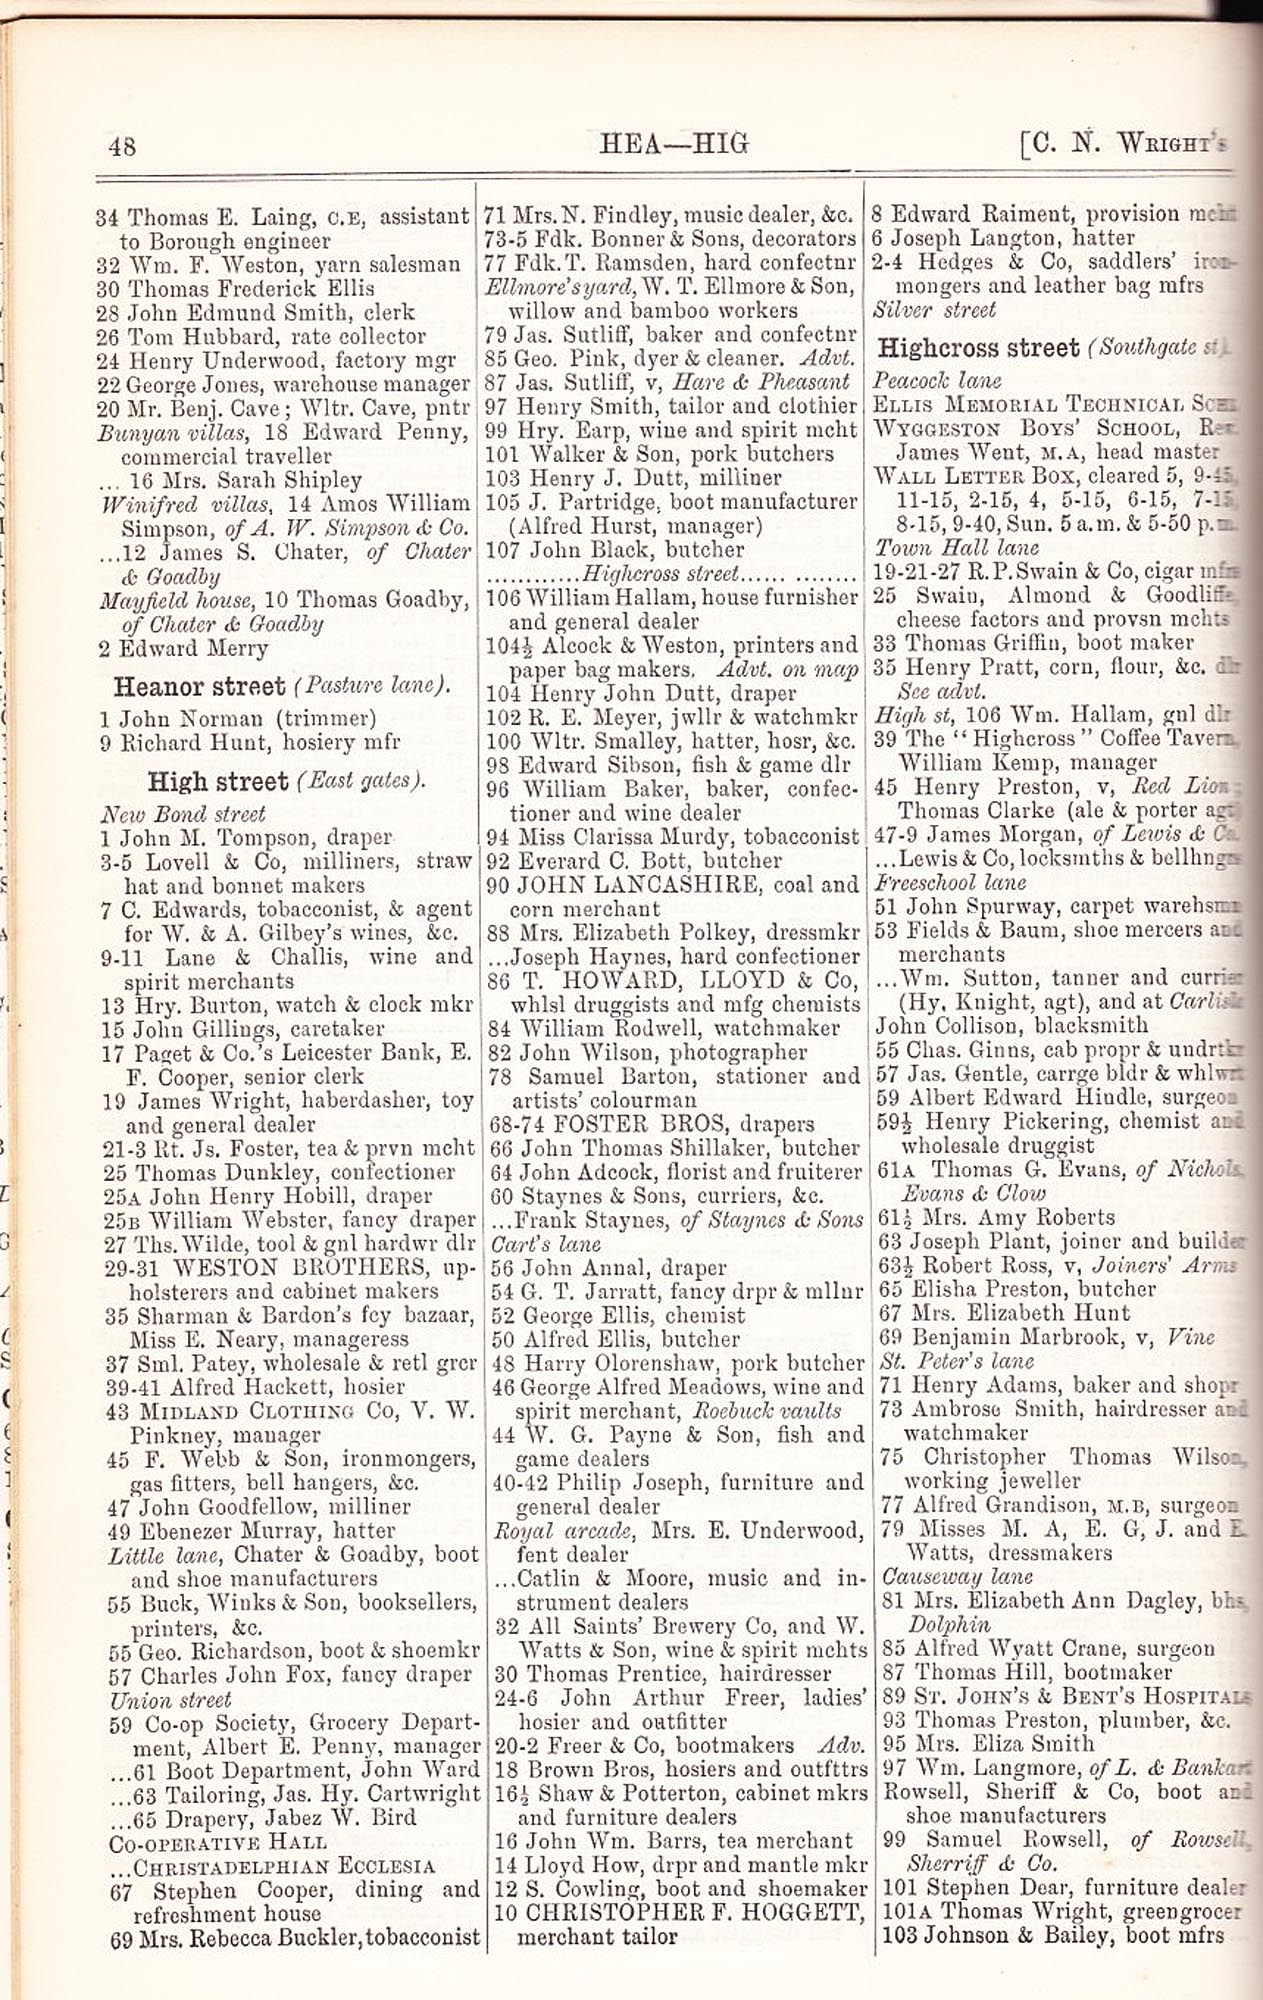 Wrights Directory listing businesses on High Street in 1892 -